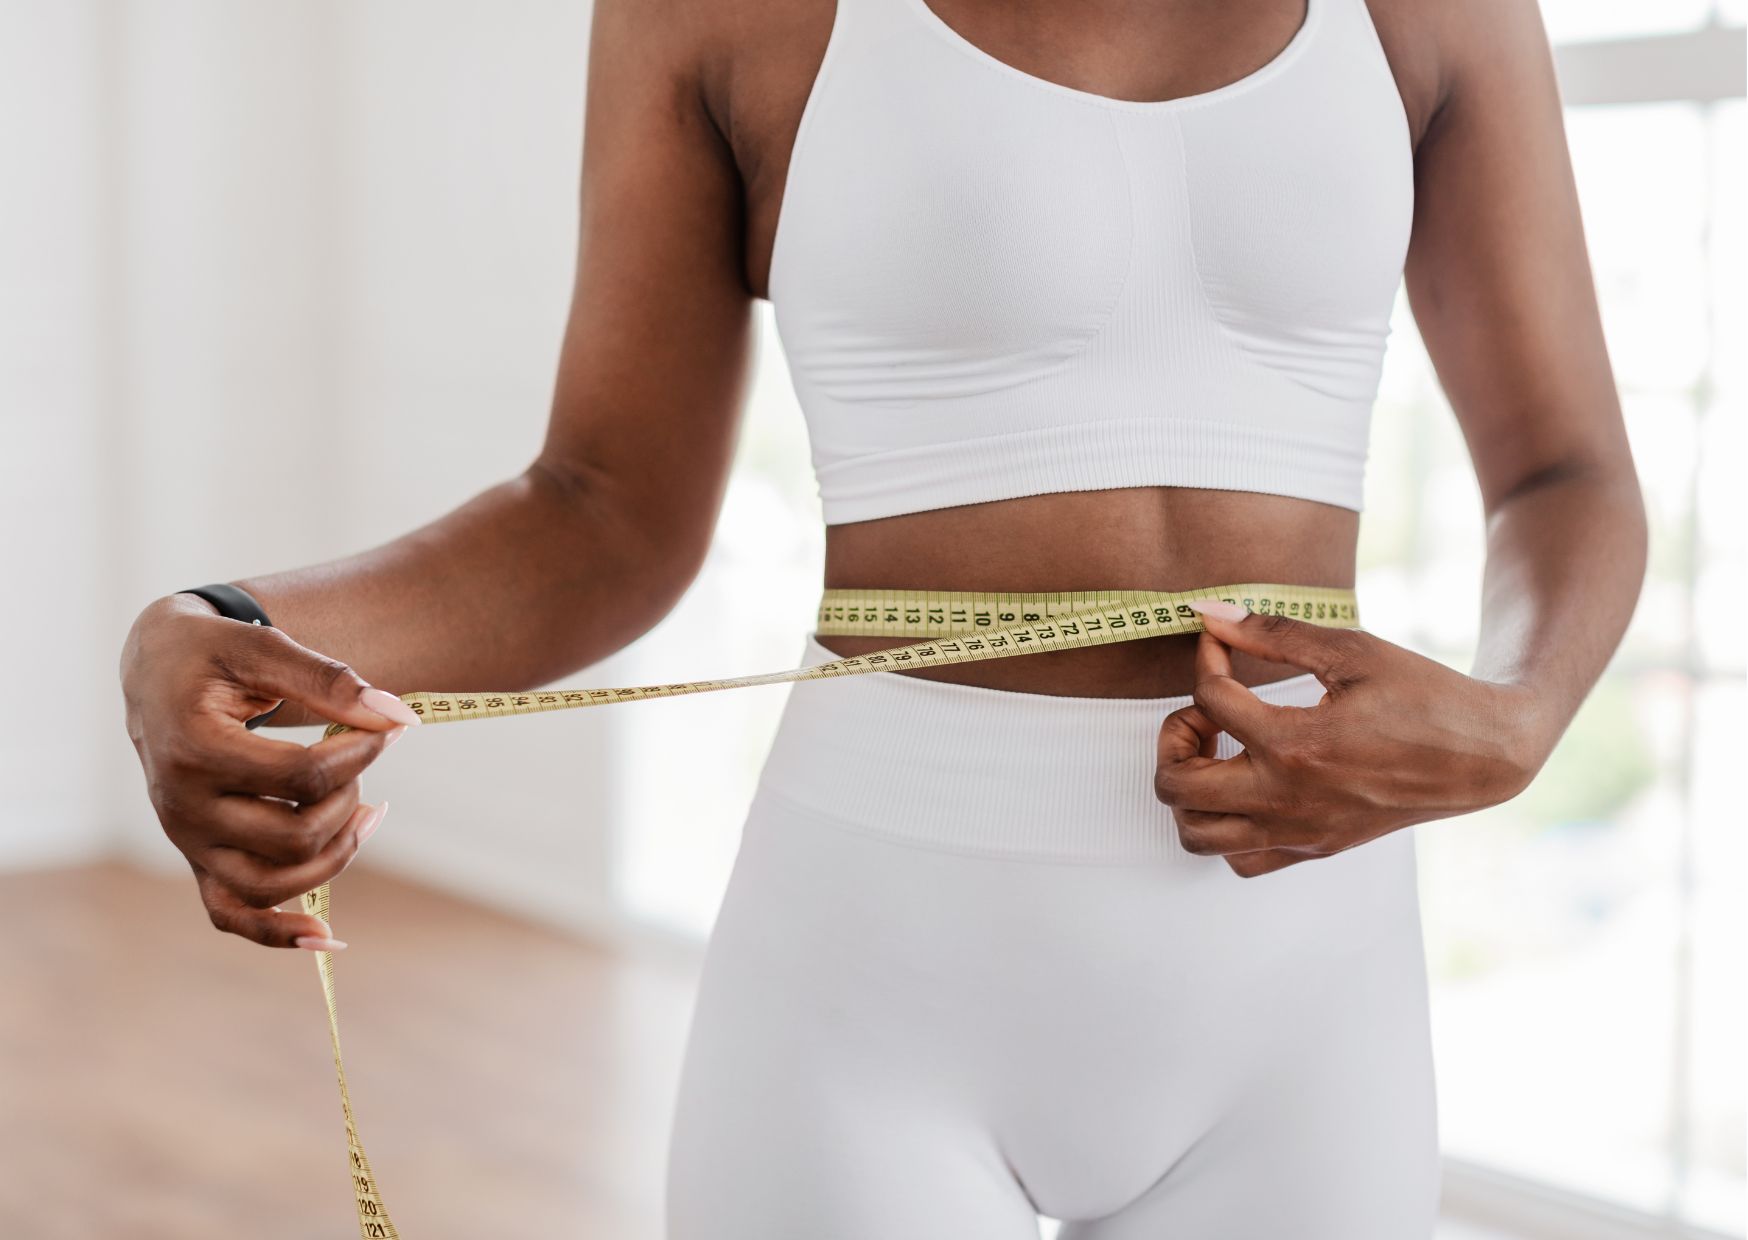 Perfect Waist & Body Tapes: Body Measurements Made Easy